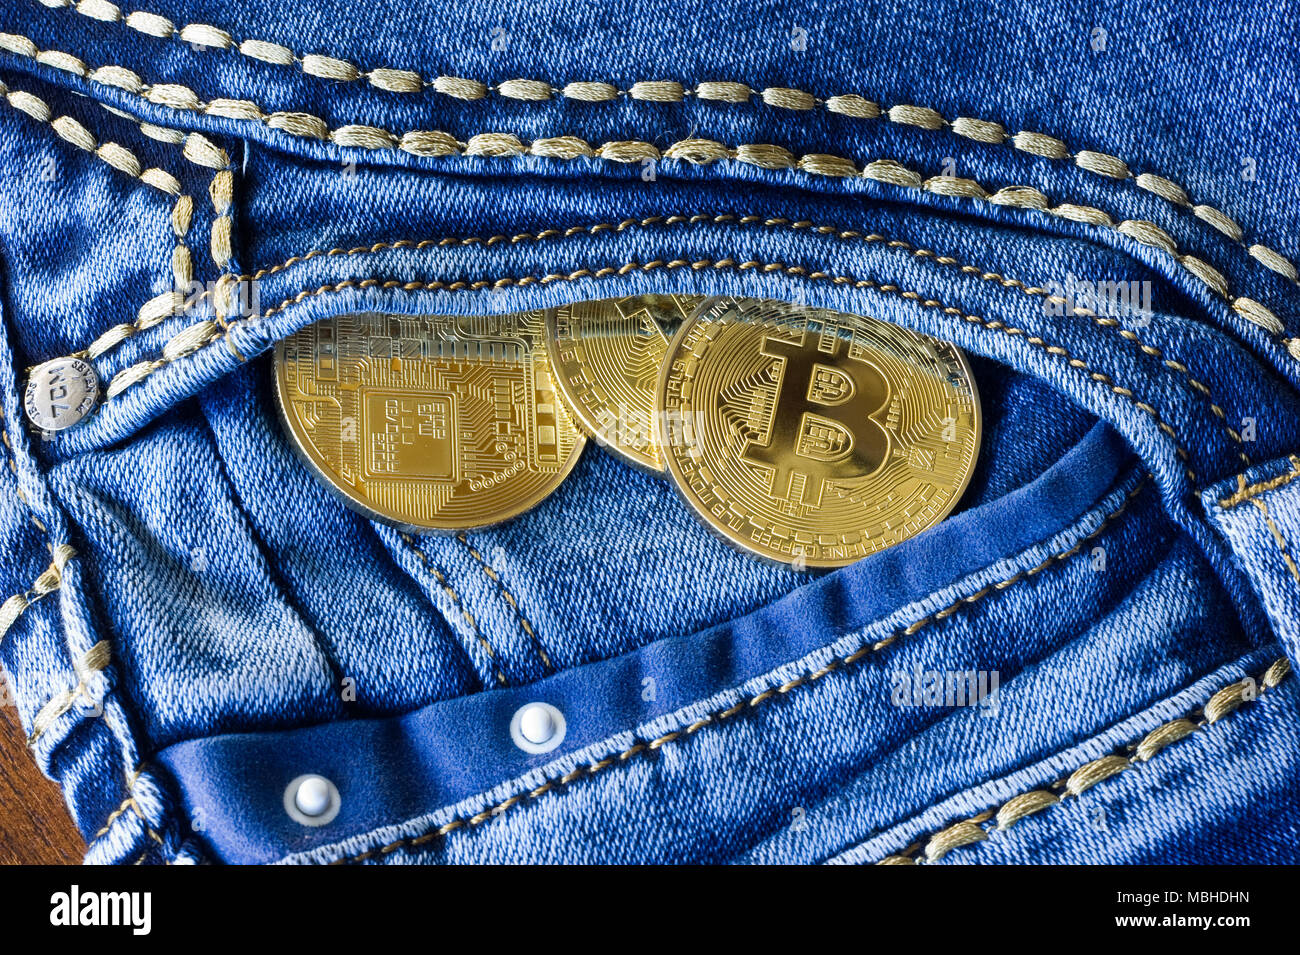 Bitcoins in the pocket of a jeans Stock Photo